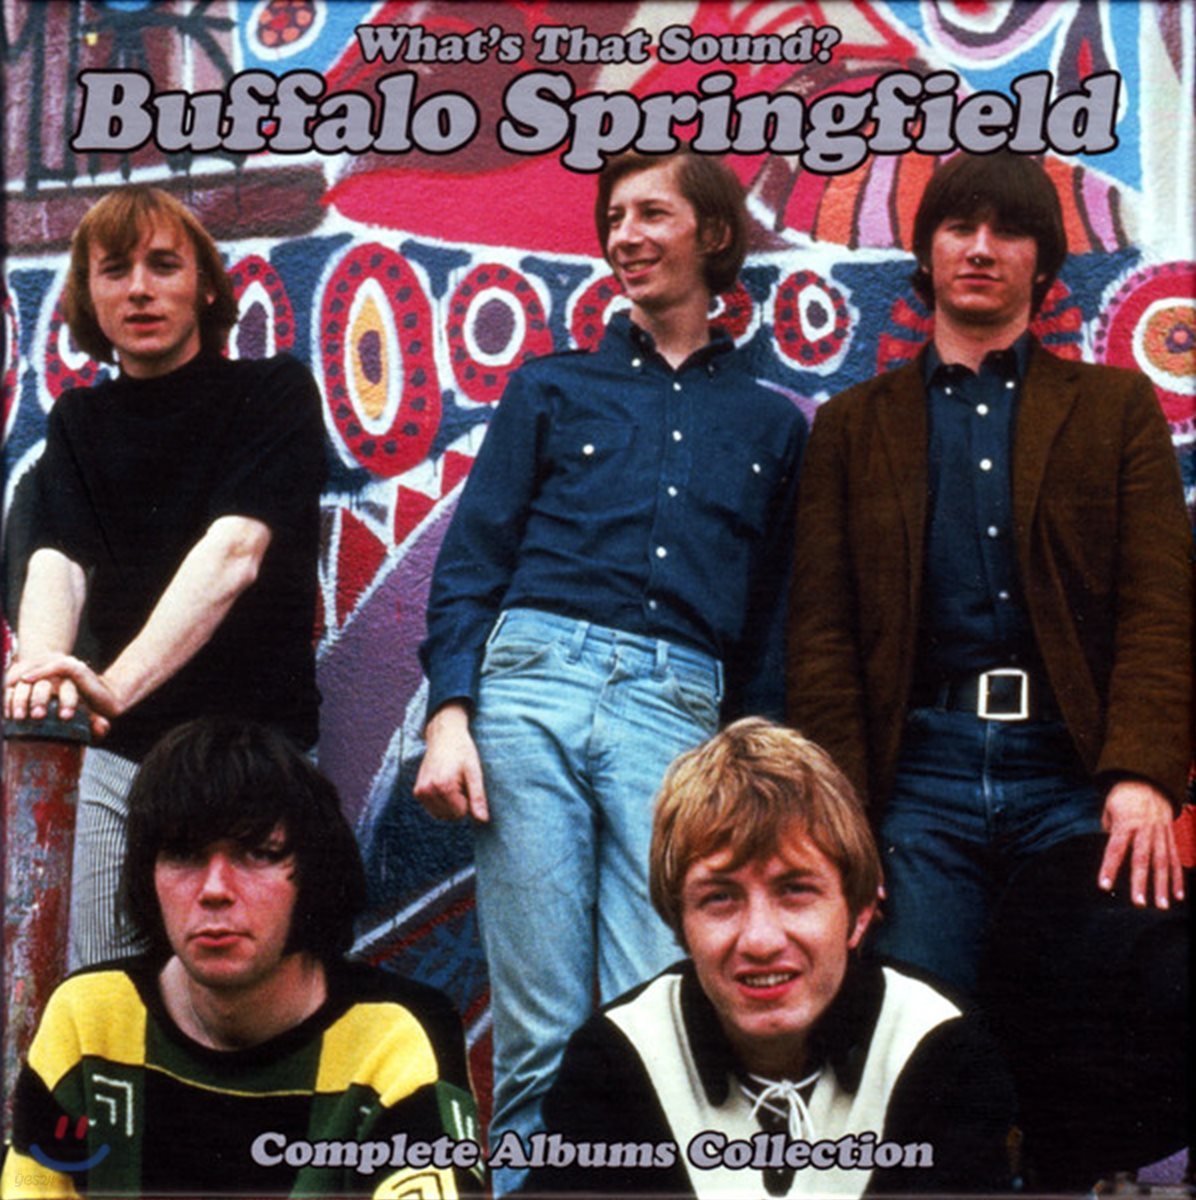 Buffalo Springfield - What’s That Sound? / Complete Albums Collection 버팔로 스프링필드 박스 세트